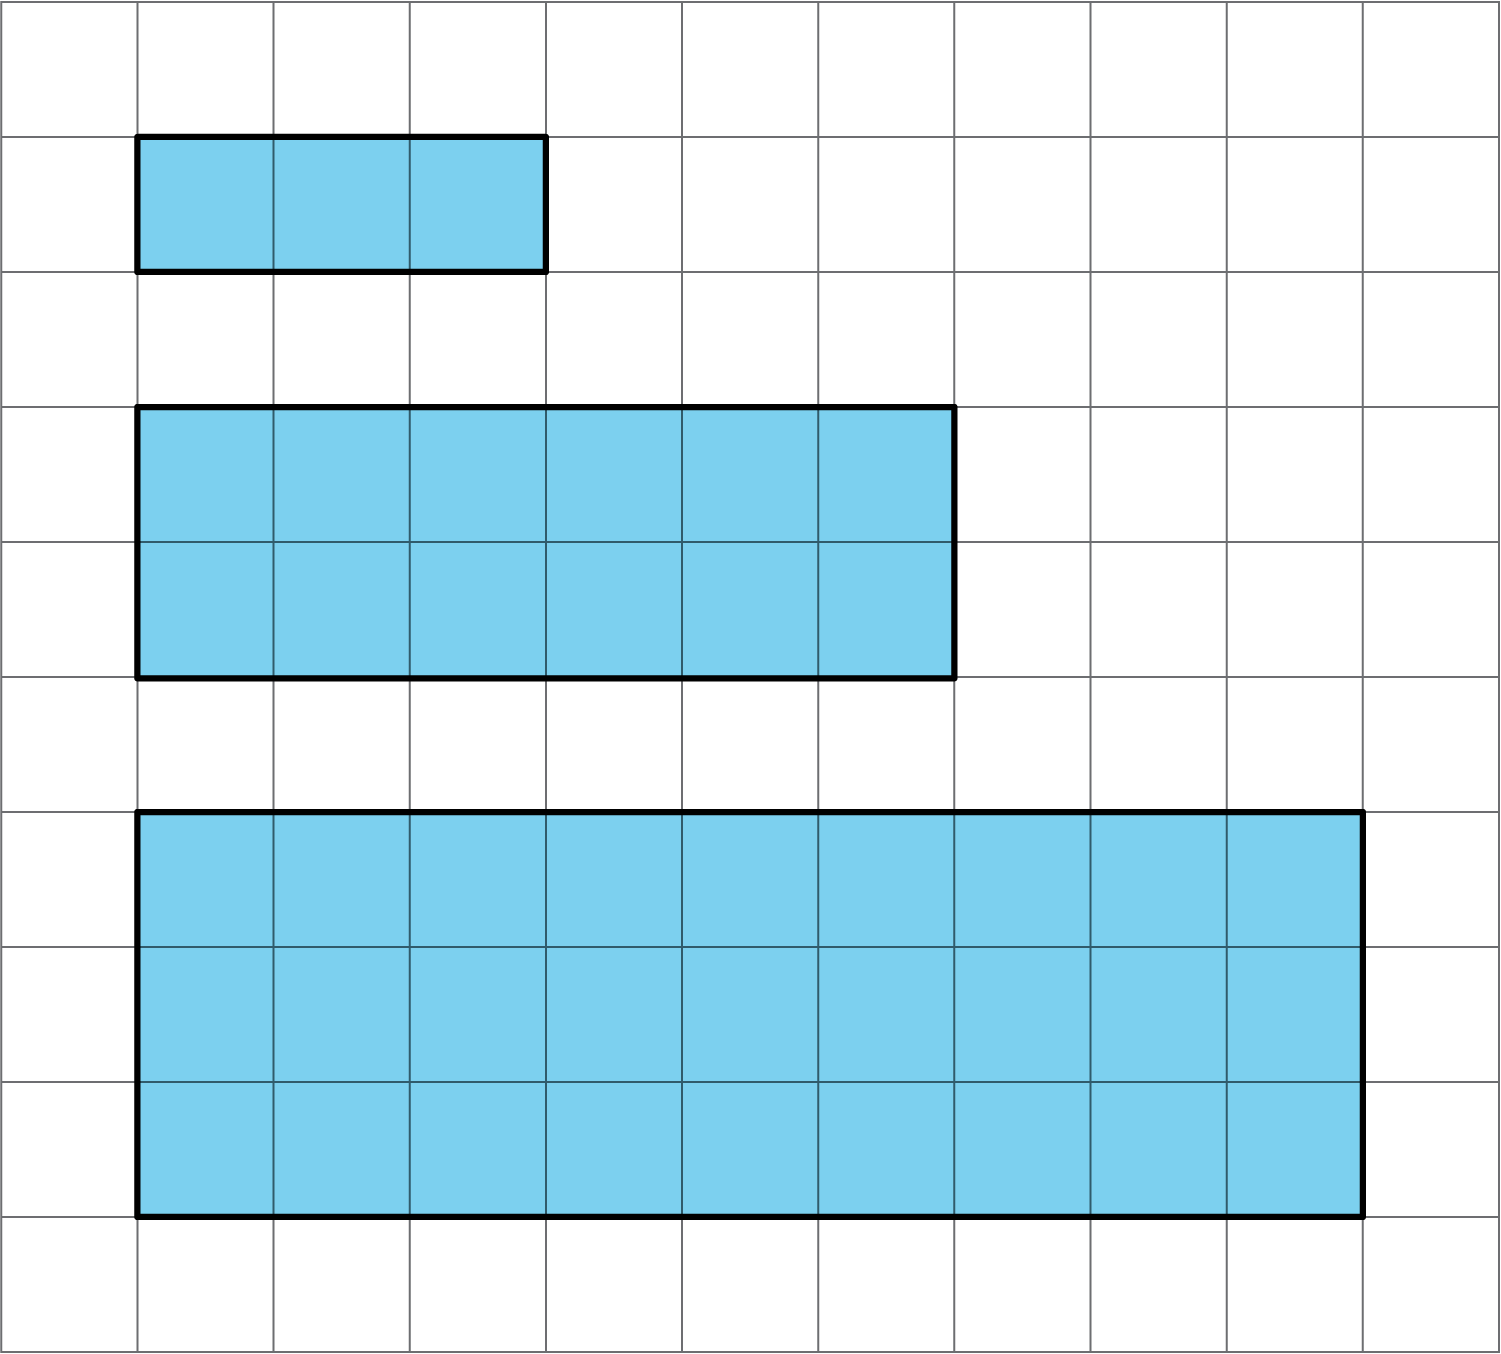 Three rectangles on a coordinate grid. The dimensions are as follows:  Top rectangle, length 3 units; width 1 unit. Middle rectangle, length 6 units; width 2 units. Bottom rectangle, length 9 units, width 3 units.